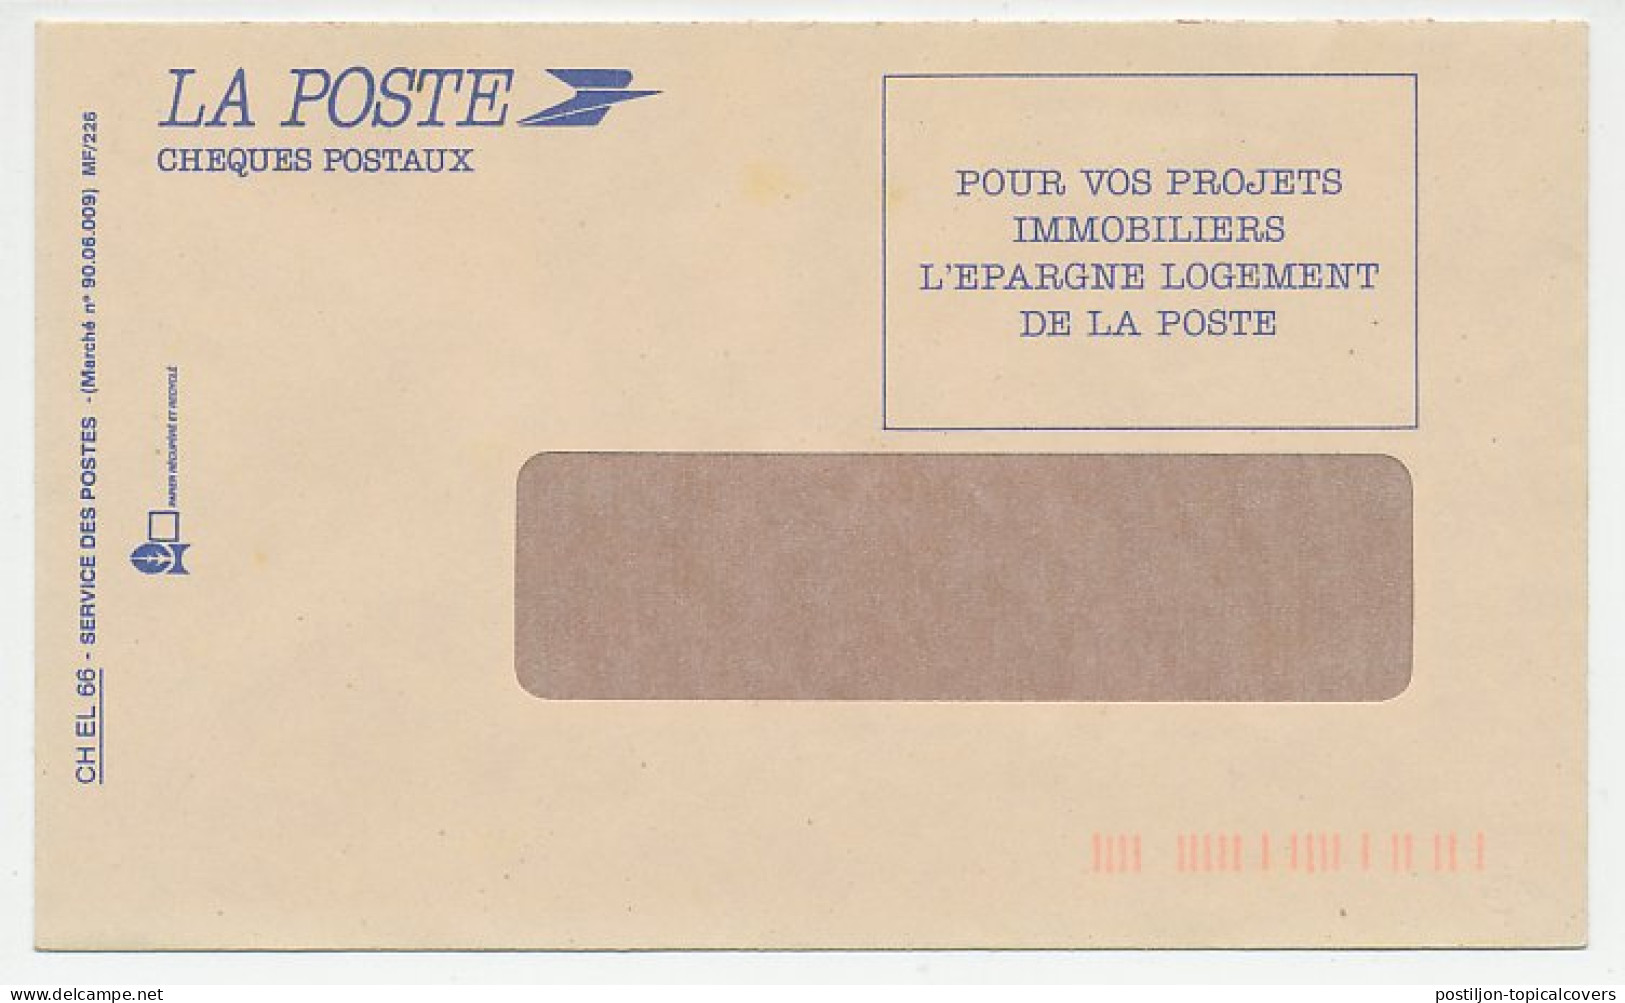 Postal Cheque Cover France 1990 Humidity - Mold - Isolation - Unclassified